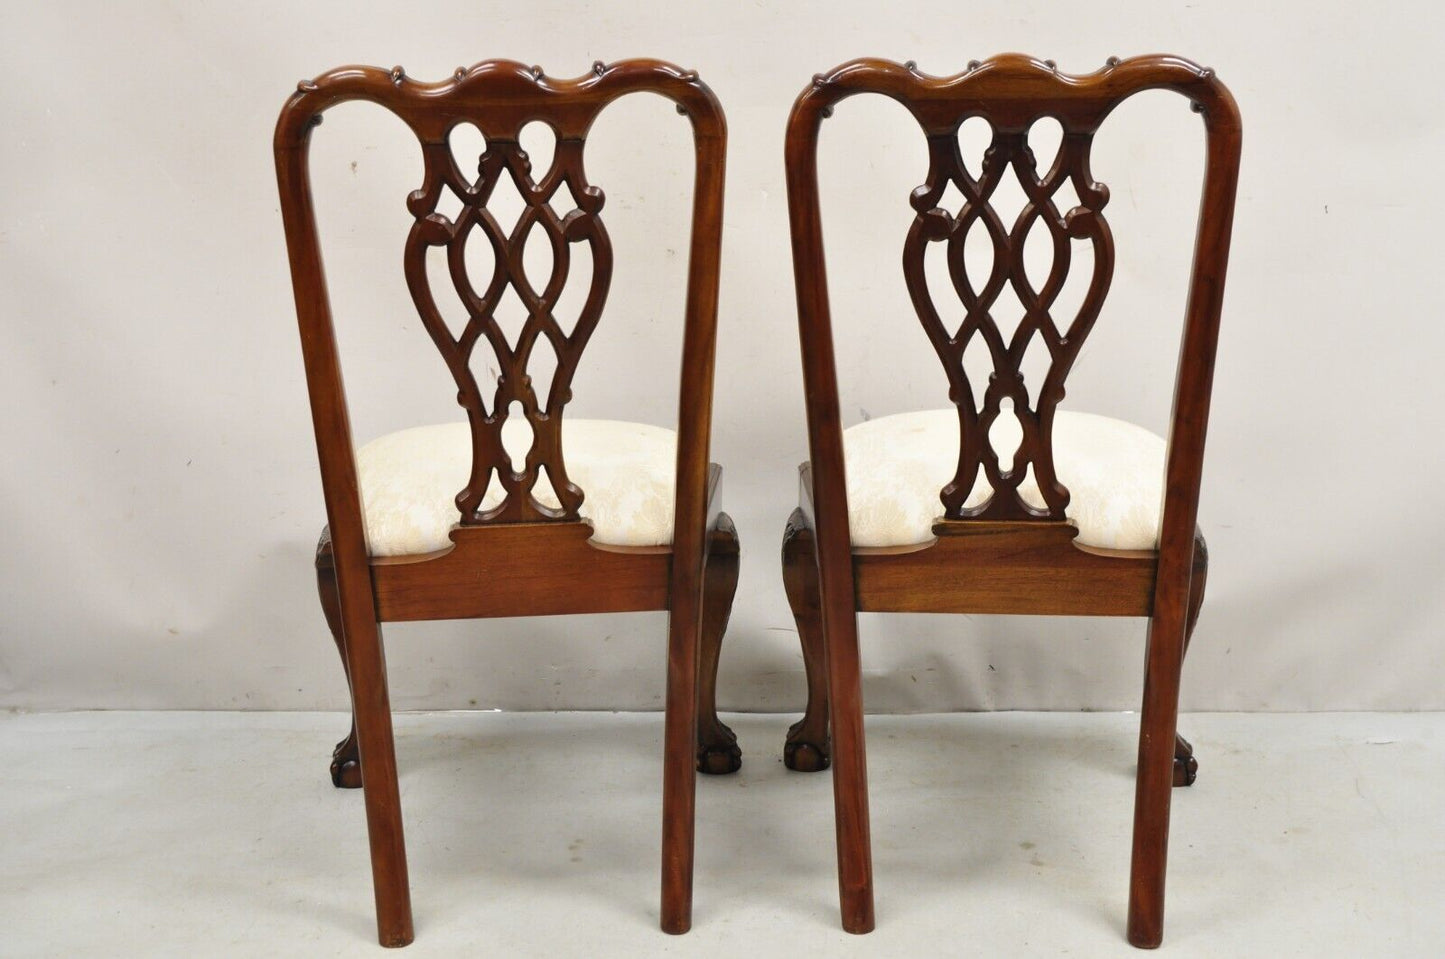 English Chippendale Style Carved Mahogany Ball & Claw Dining Side Chairs - Pair